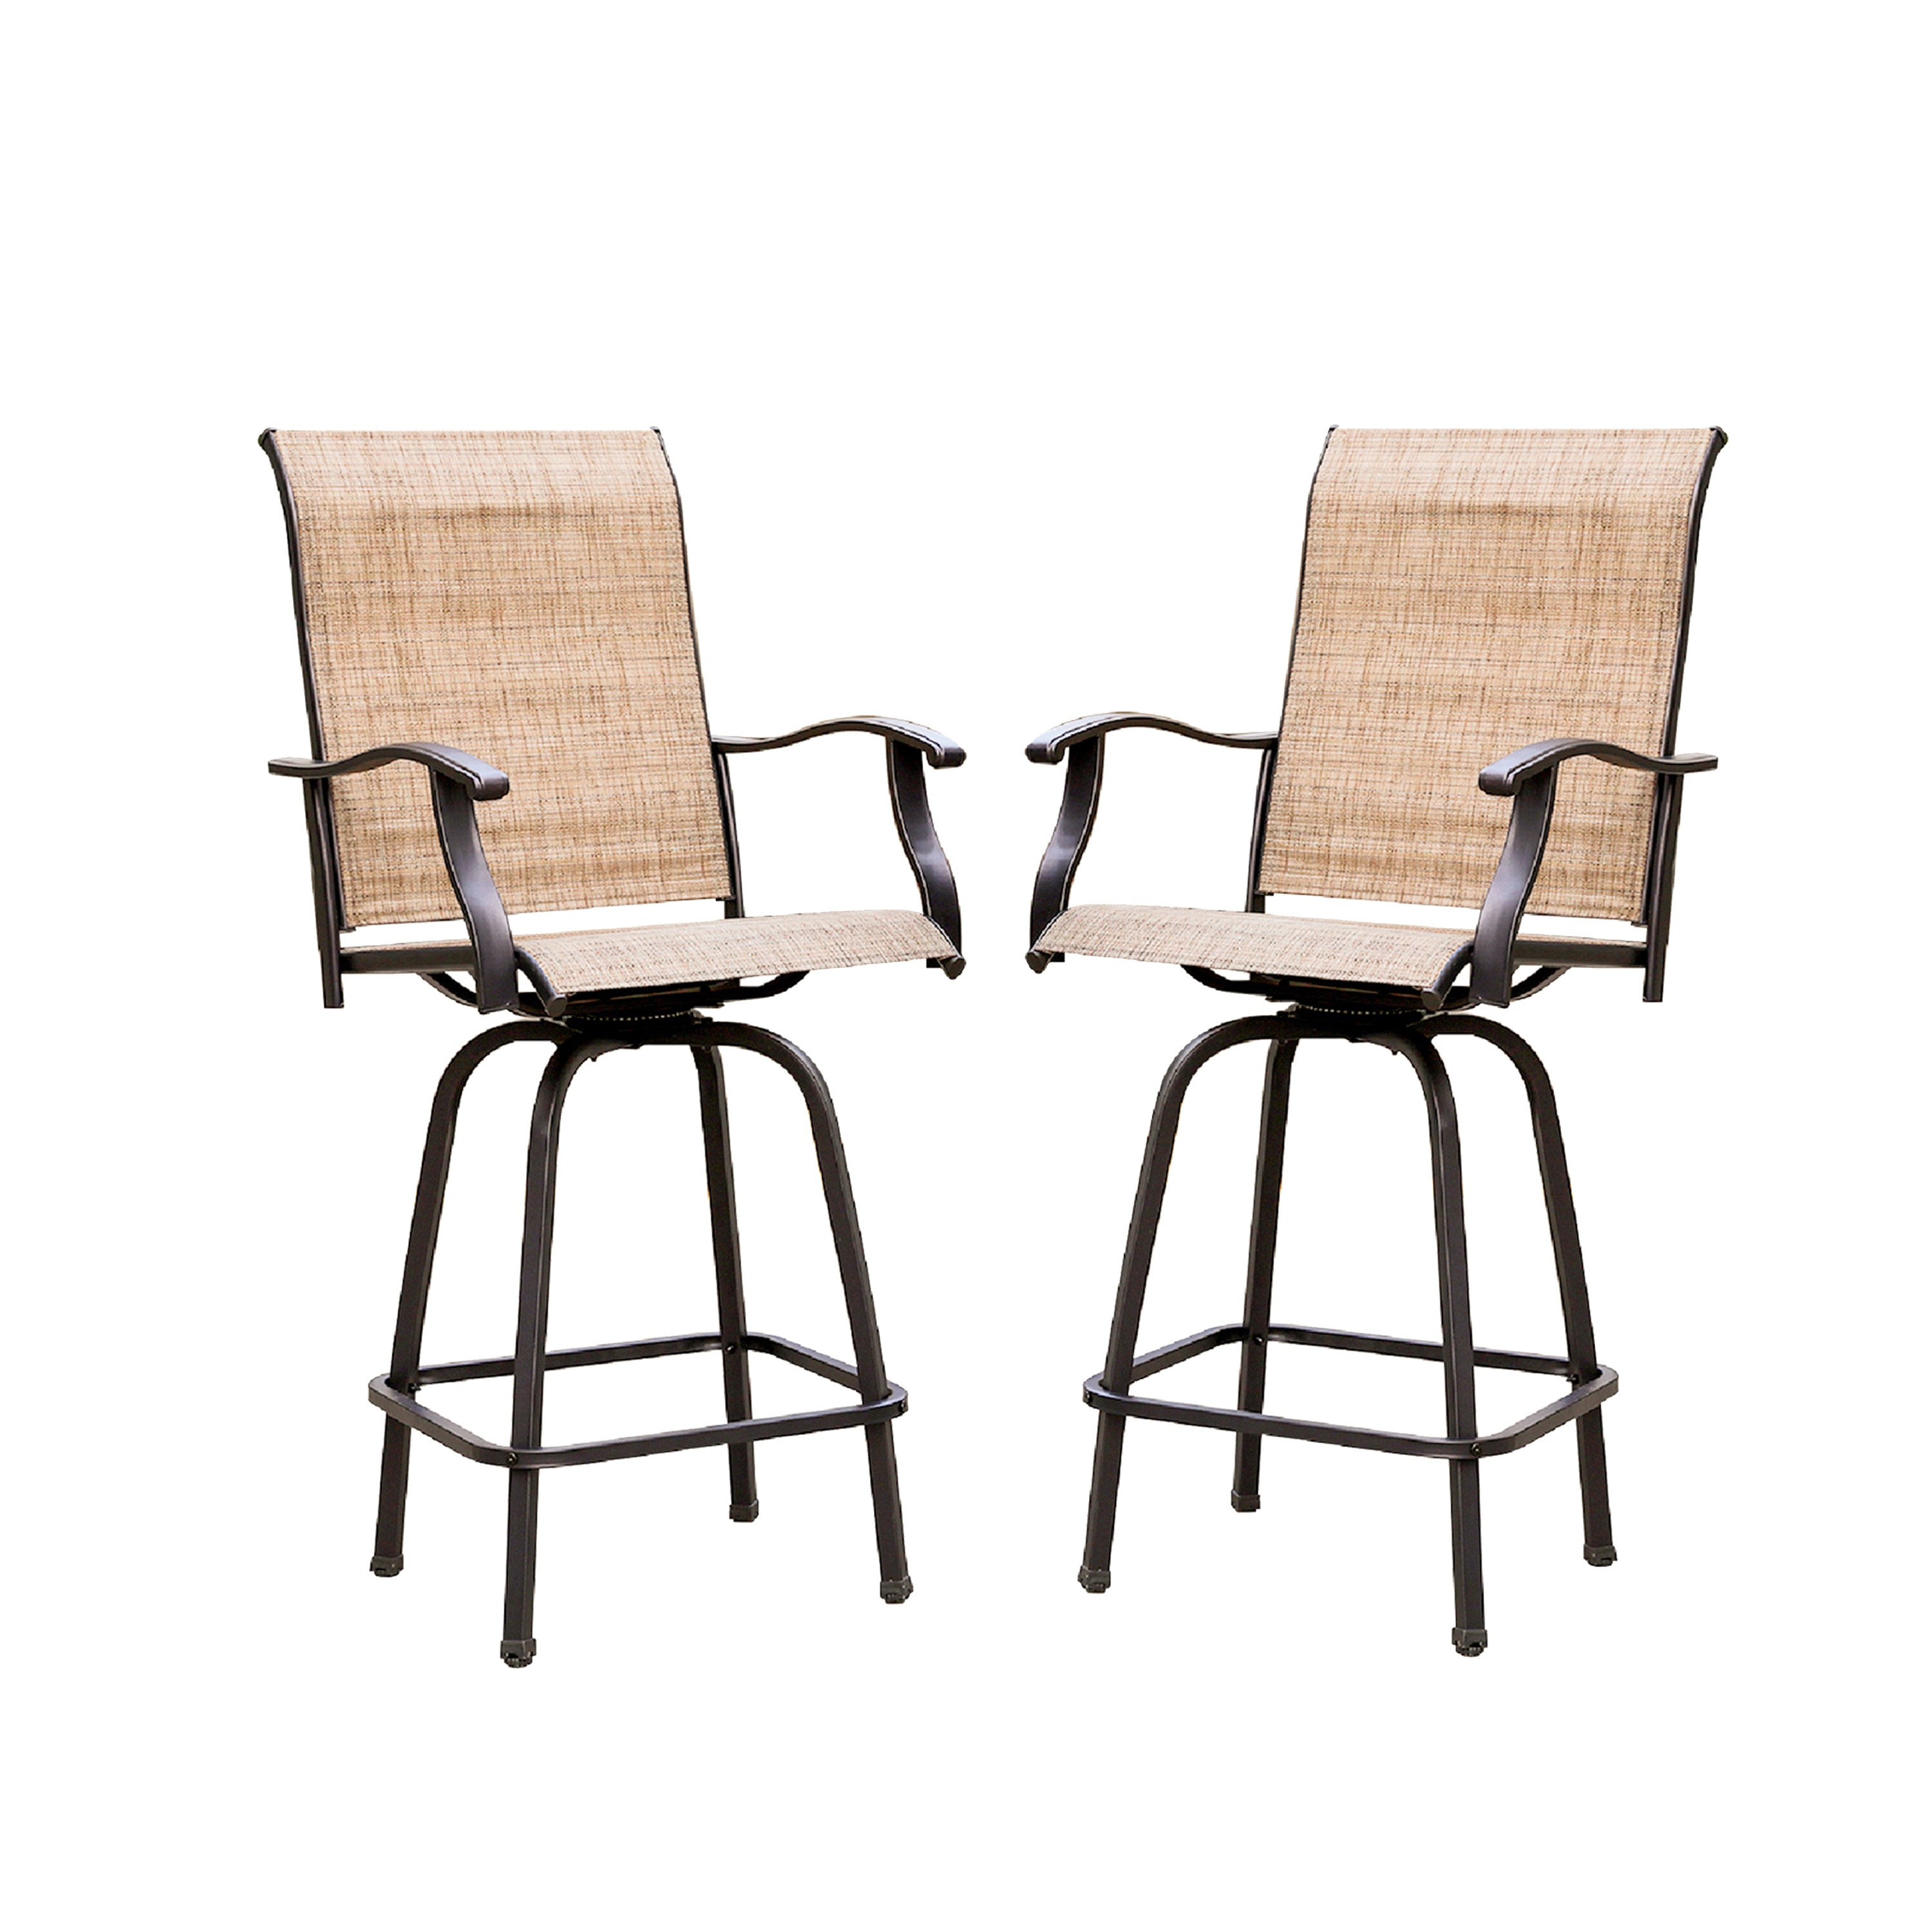 PHI VILLA 3 PCS Patio Swivel Bar Sets Textilene High Bistro Sets with 2 Outdoor Bar Stools and 1 Square Bar Table Brown 